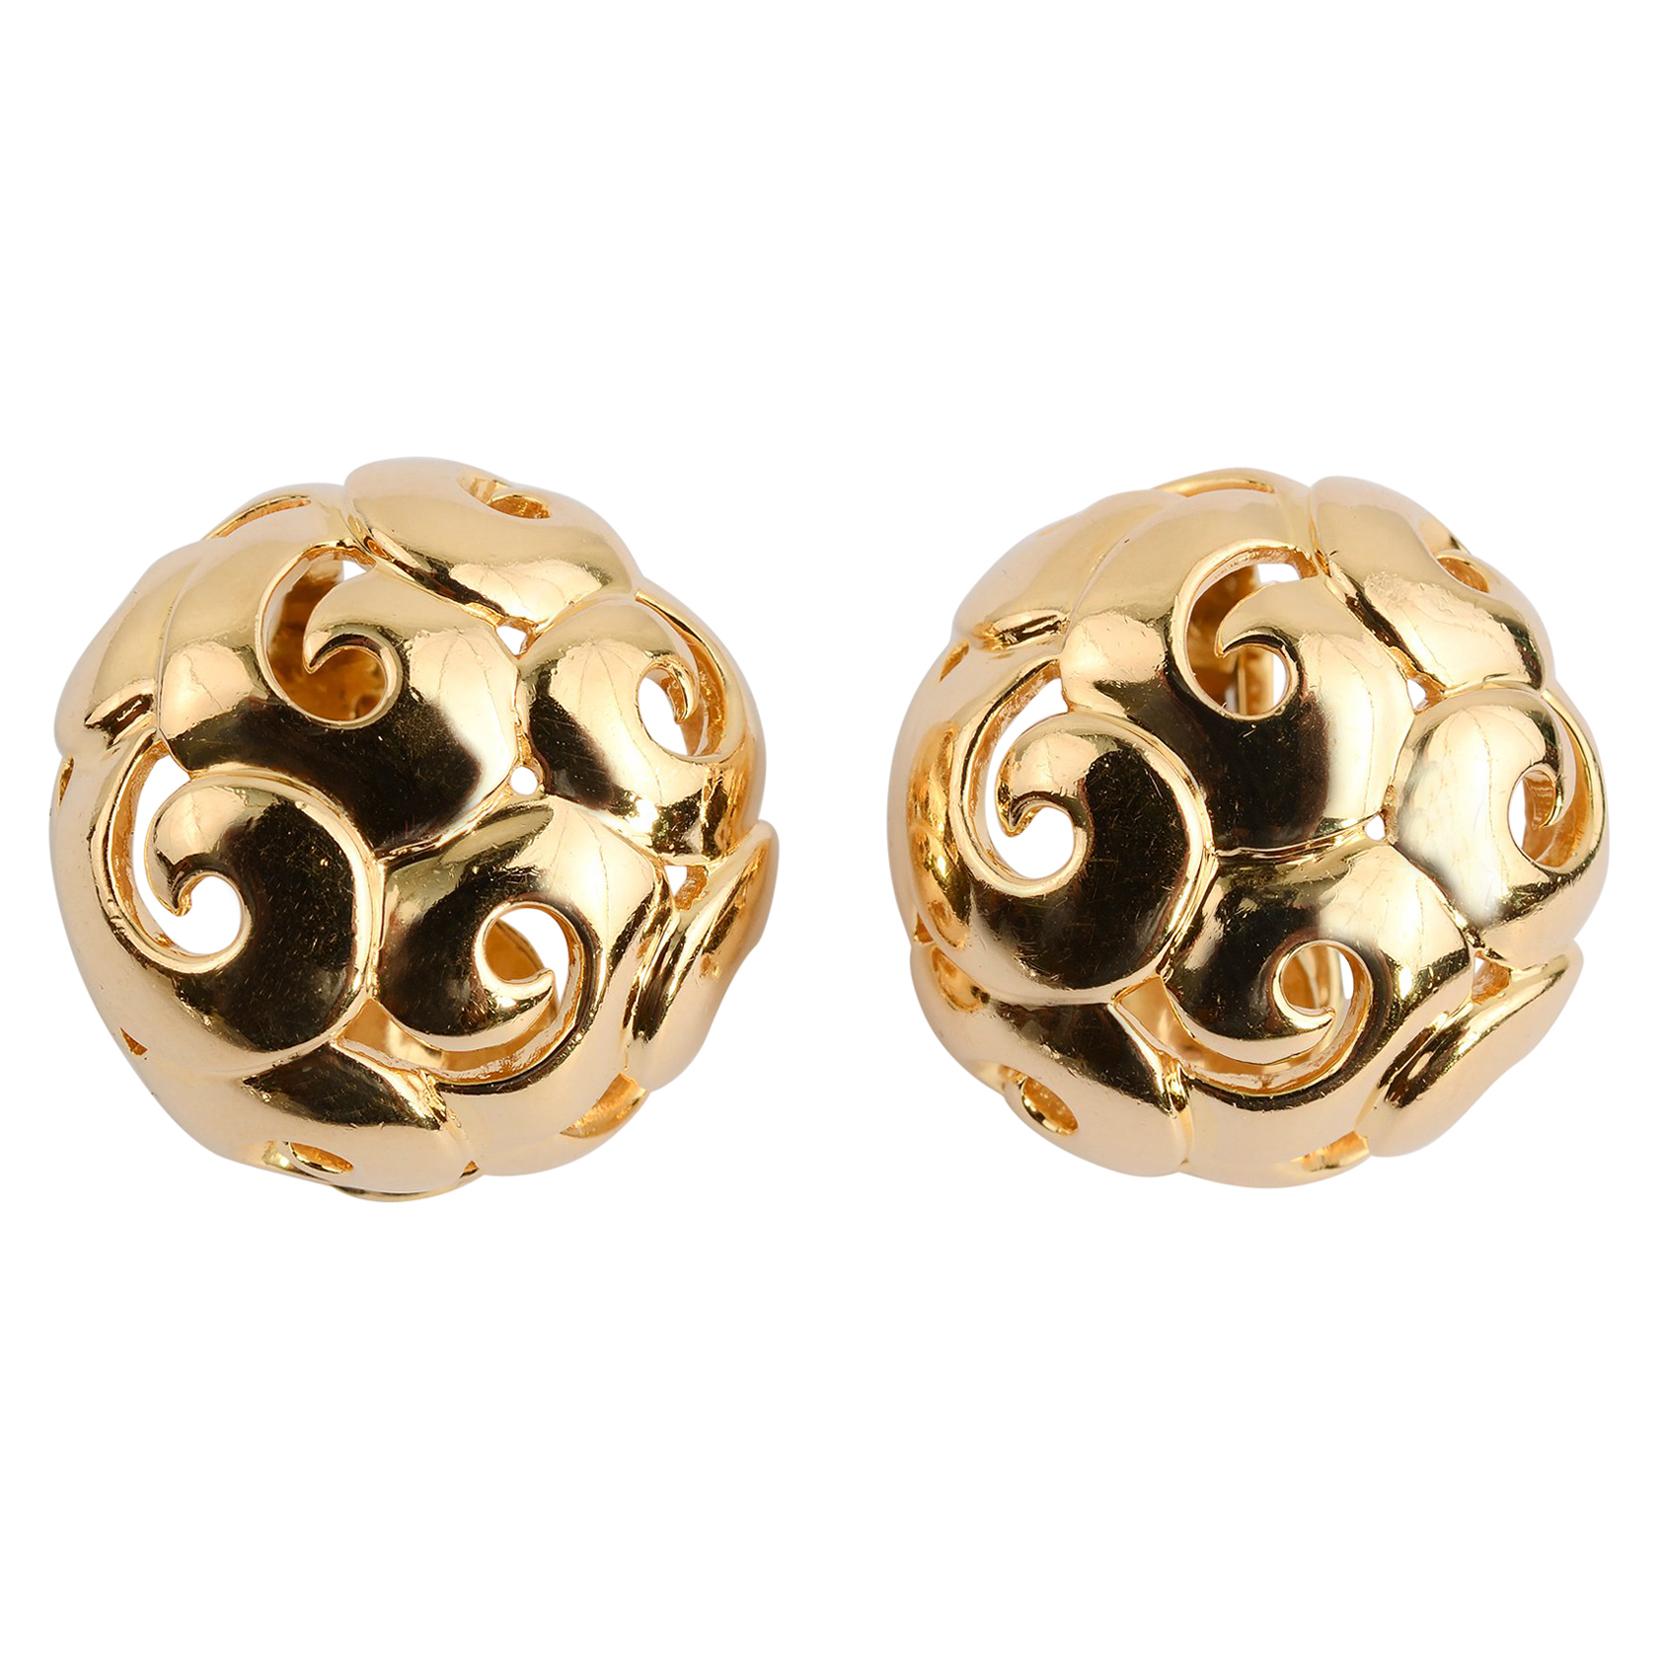 Gumps Gold Dome Earrings with Circular Design For Sale